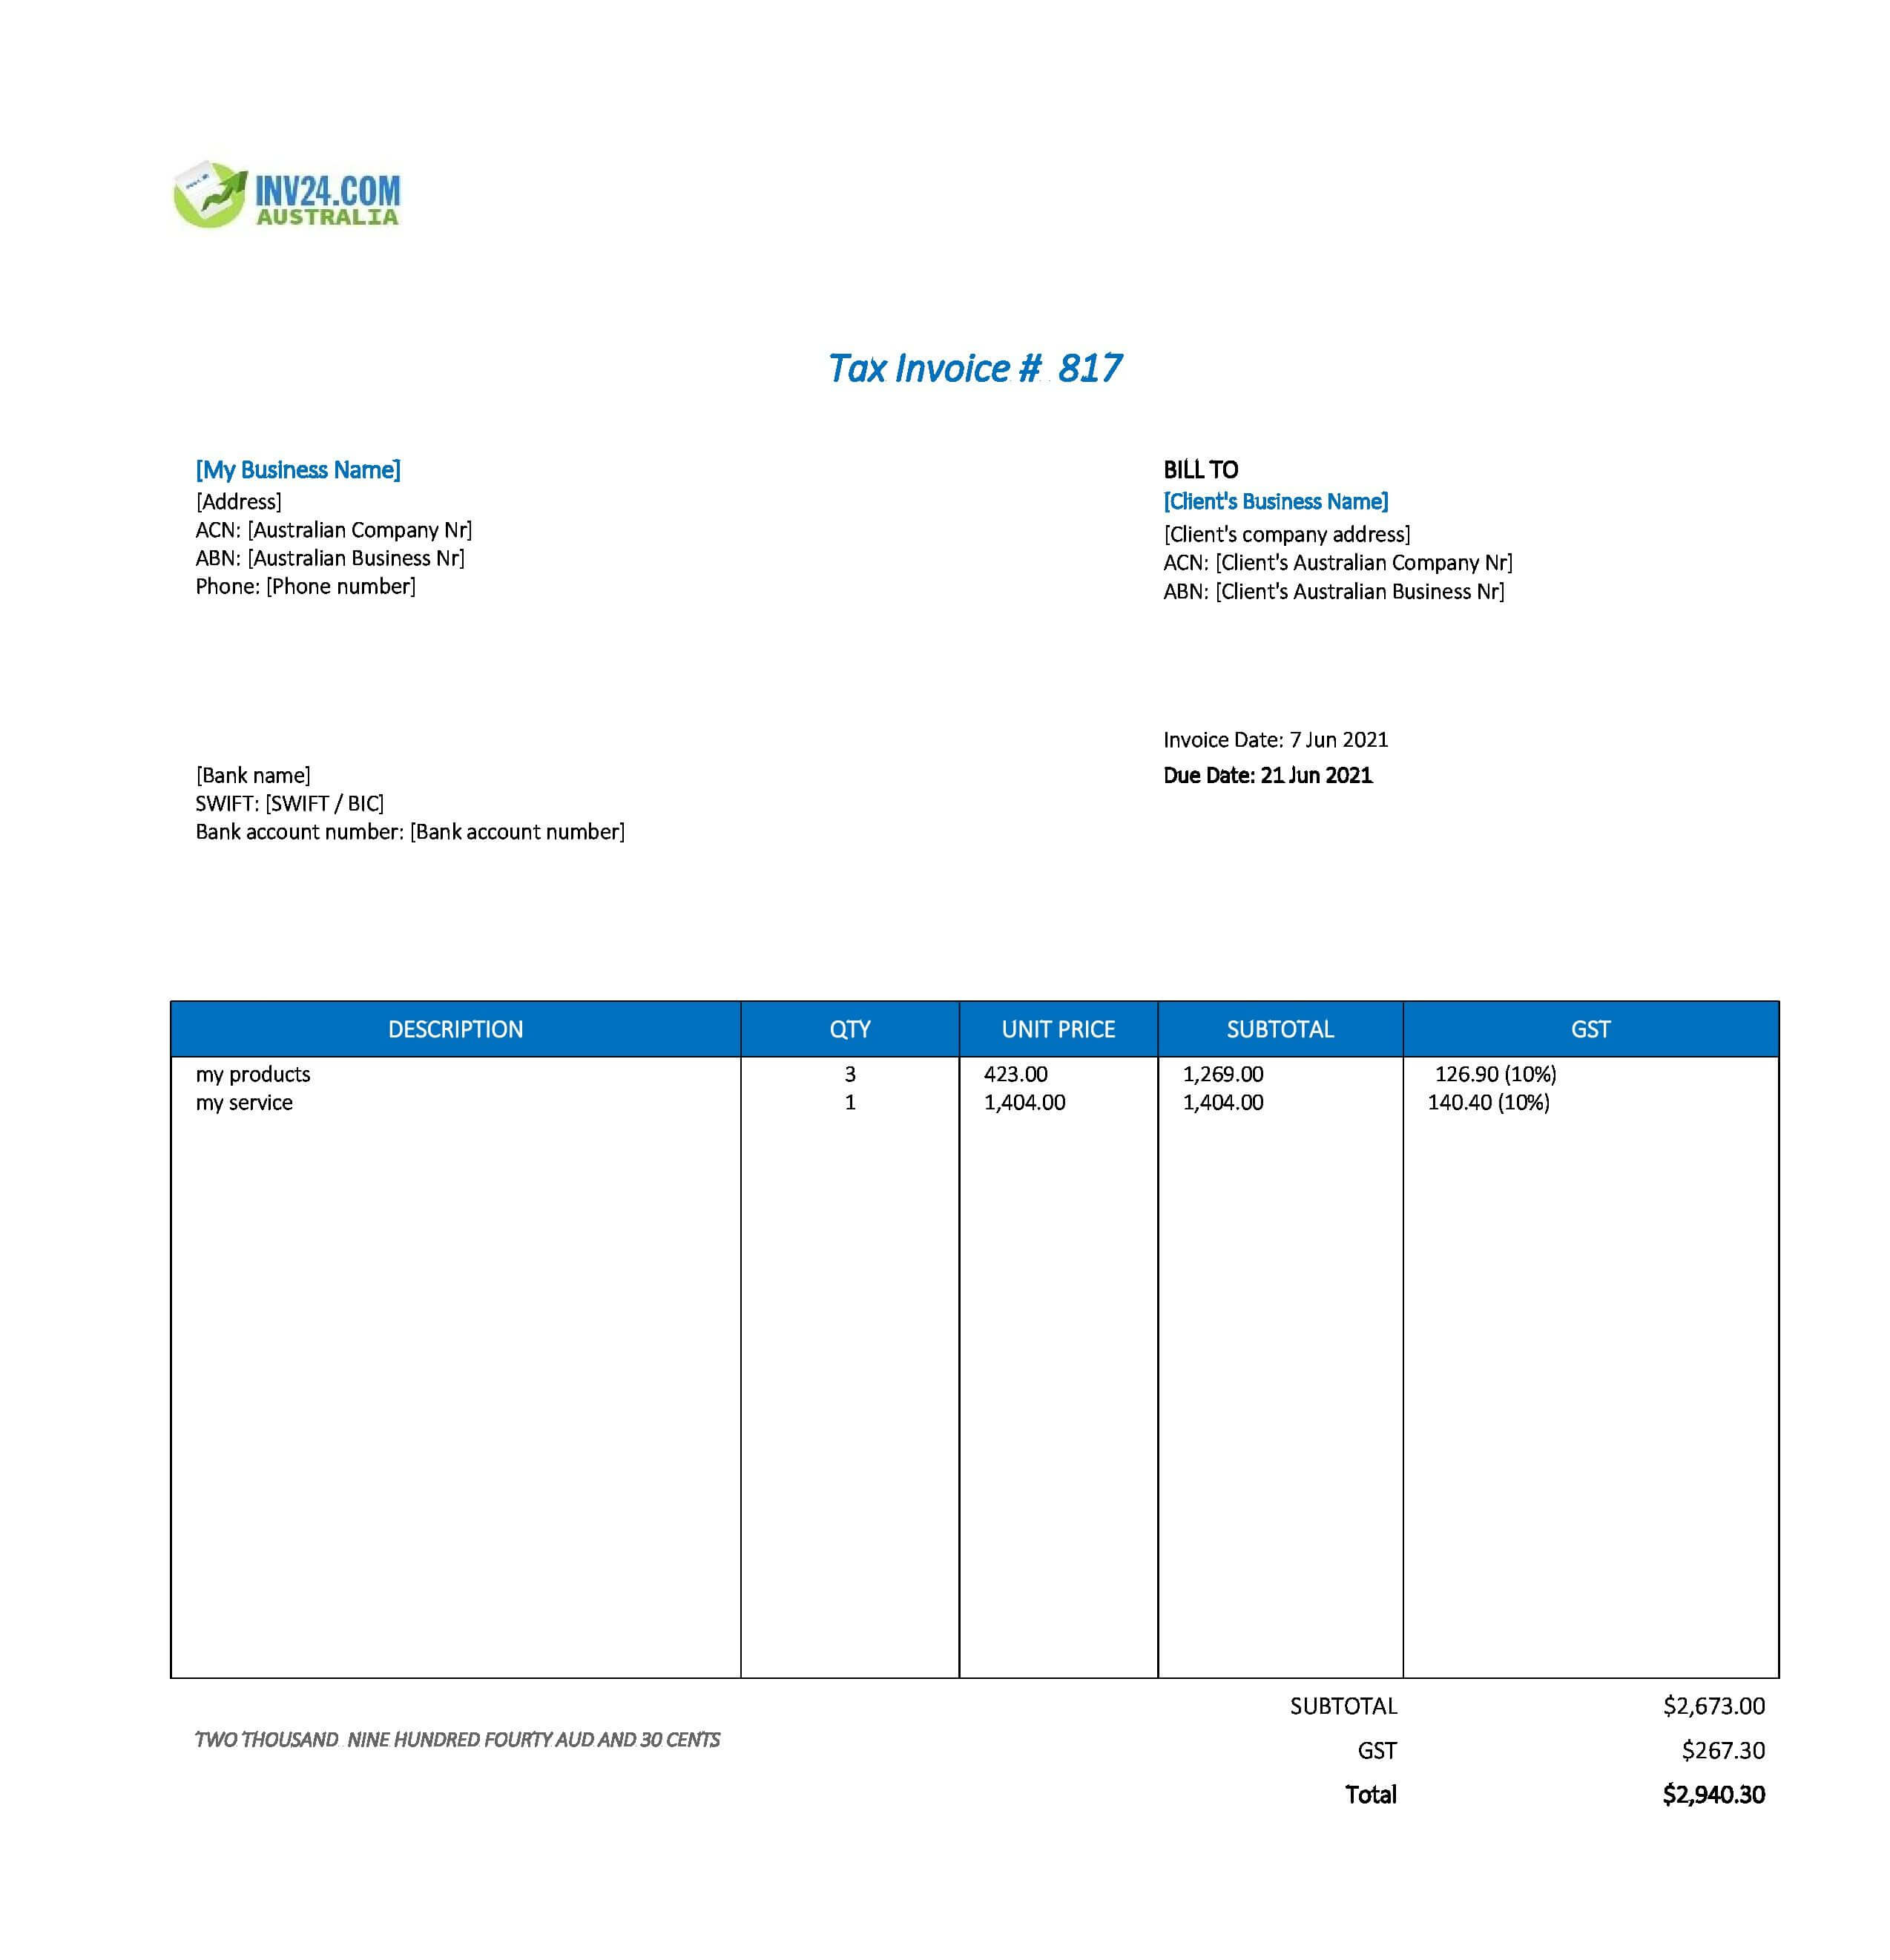 invoice with bank details example